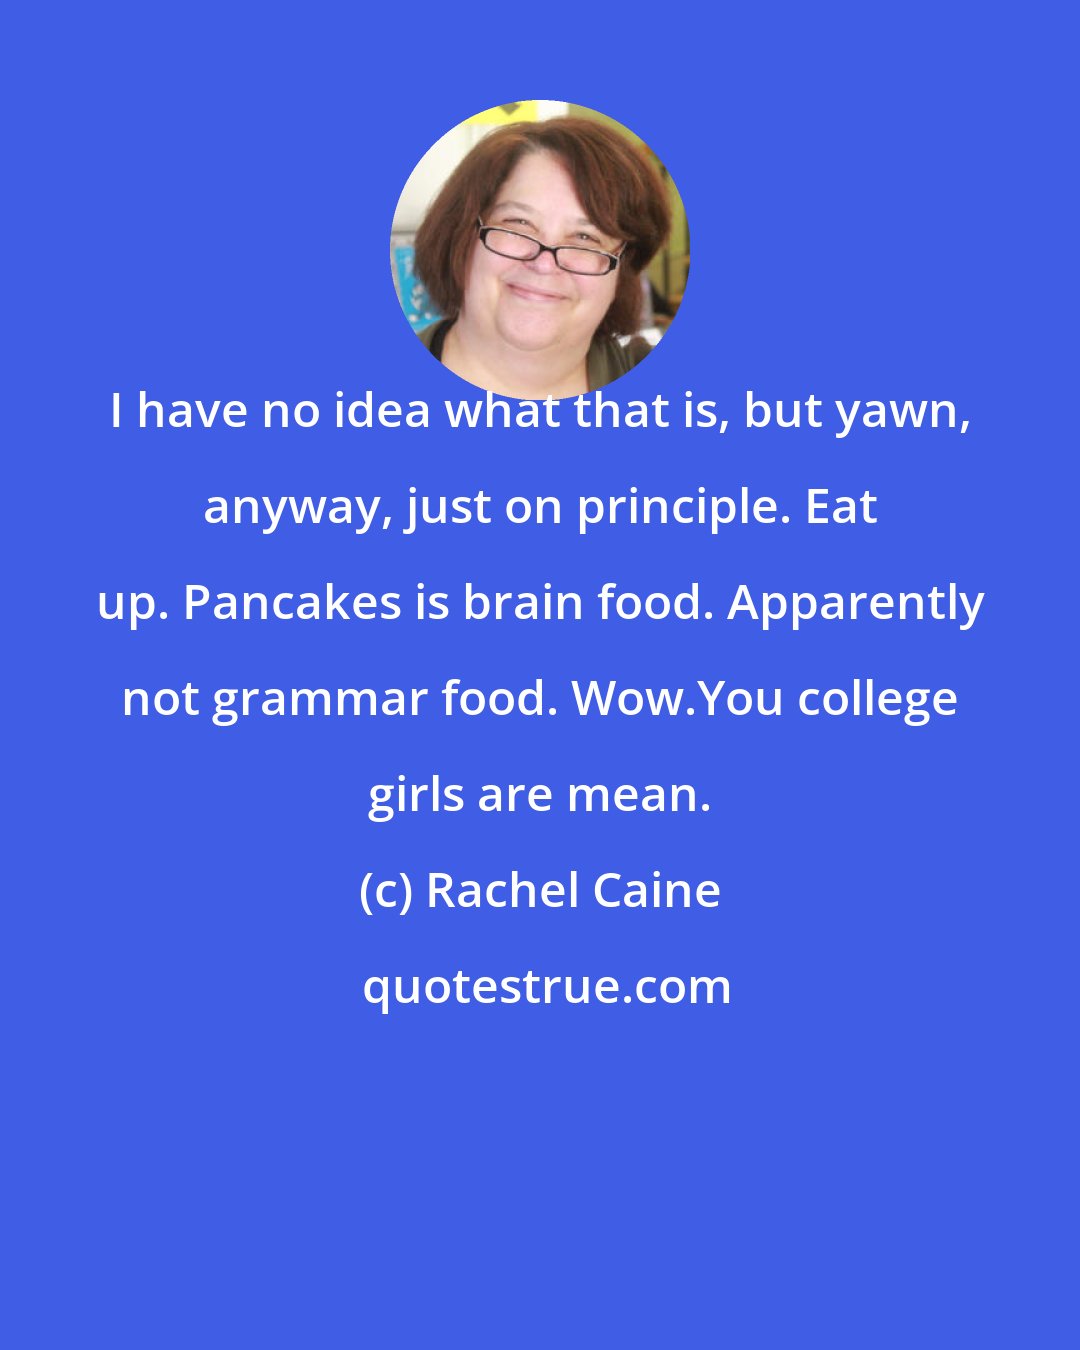 Rachel Caine: I have no idea what that is, but yawn, anyway, just on principle. Eat up. Pancakes is brain food. Apparently not grammar food. Wow.You college girls are mean.